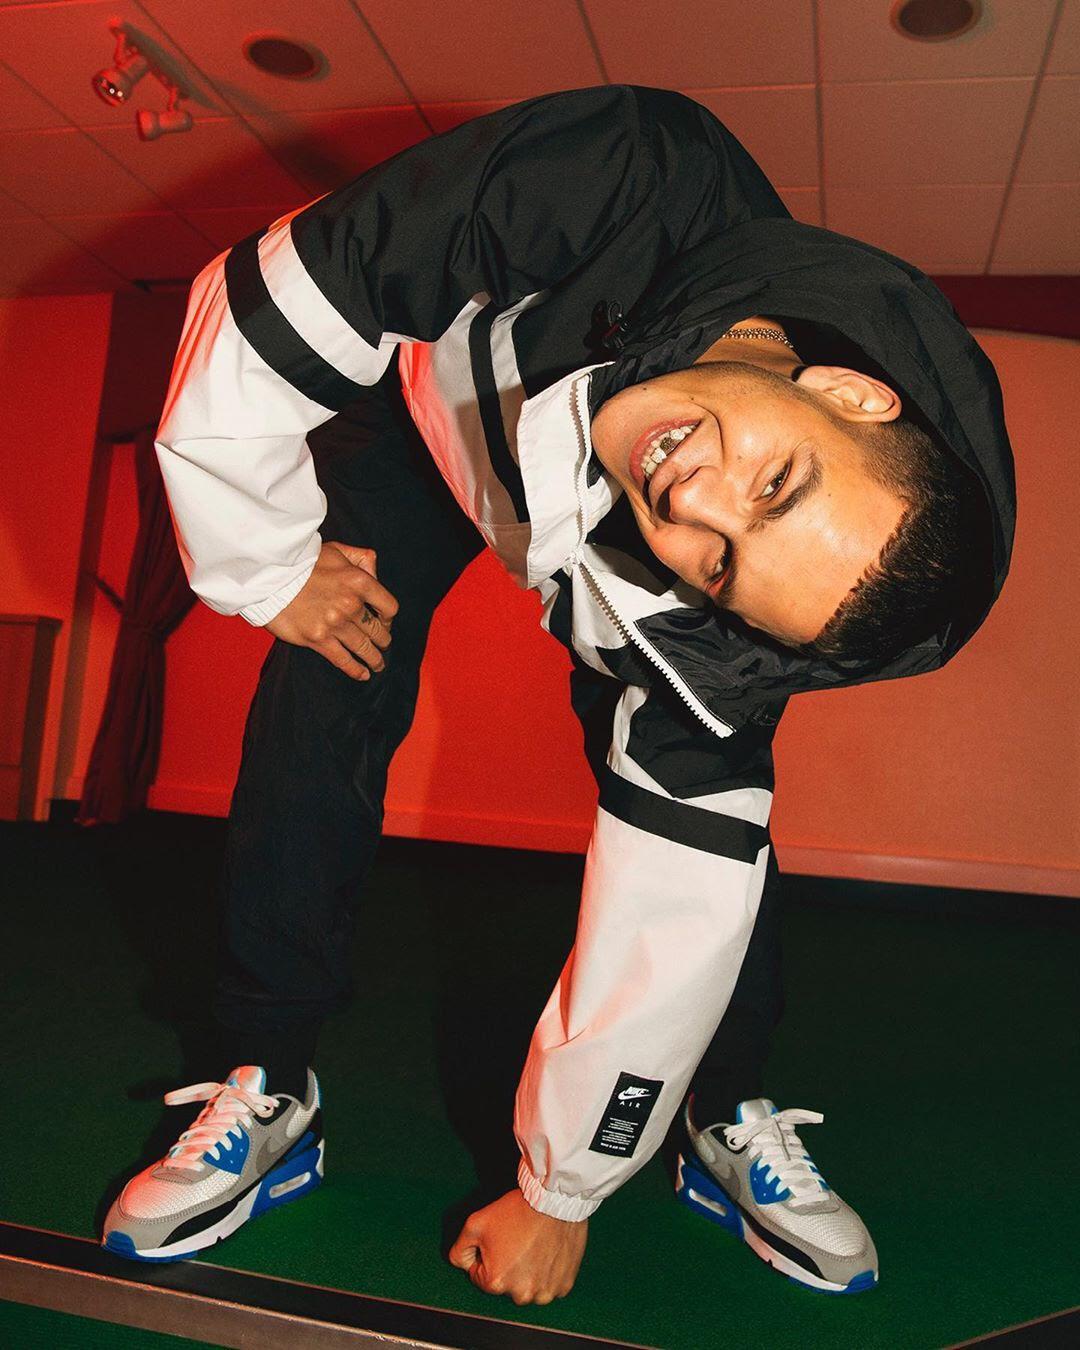 tema Novedad inventar TAFKUWAIT on Twitter: "Repost @nikesportswear @slowthai knew he had to be  himself or nothing. For the British rapper, going against the grain is  nothing new. ⁣⁣ ⁣⁣ #shareyourair #airmax #nike #forhim #للرجال #